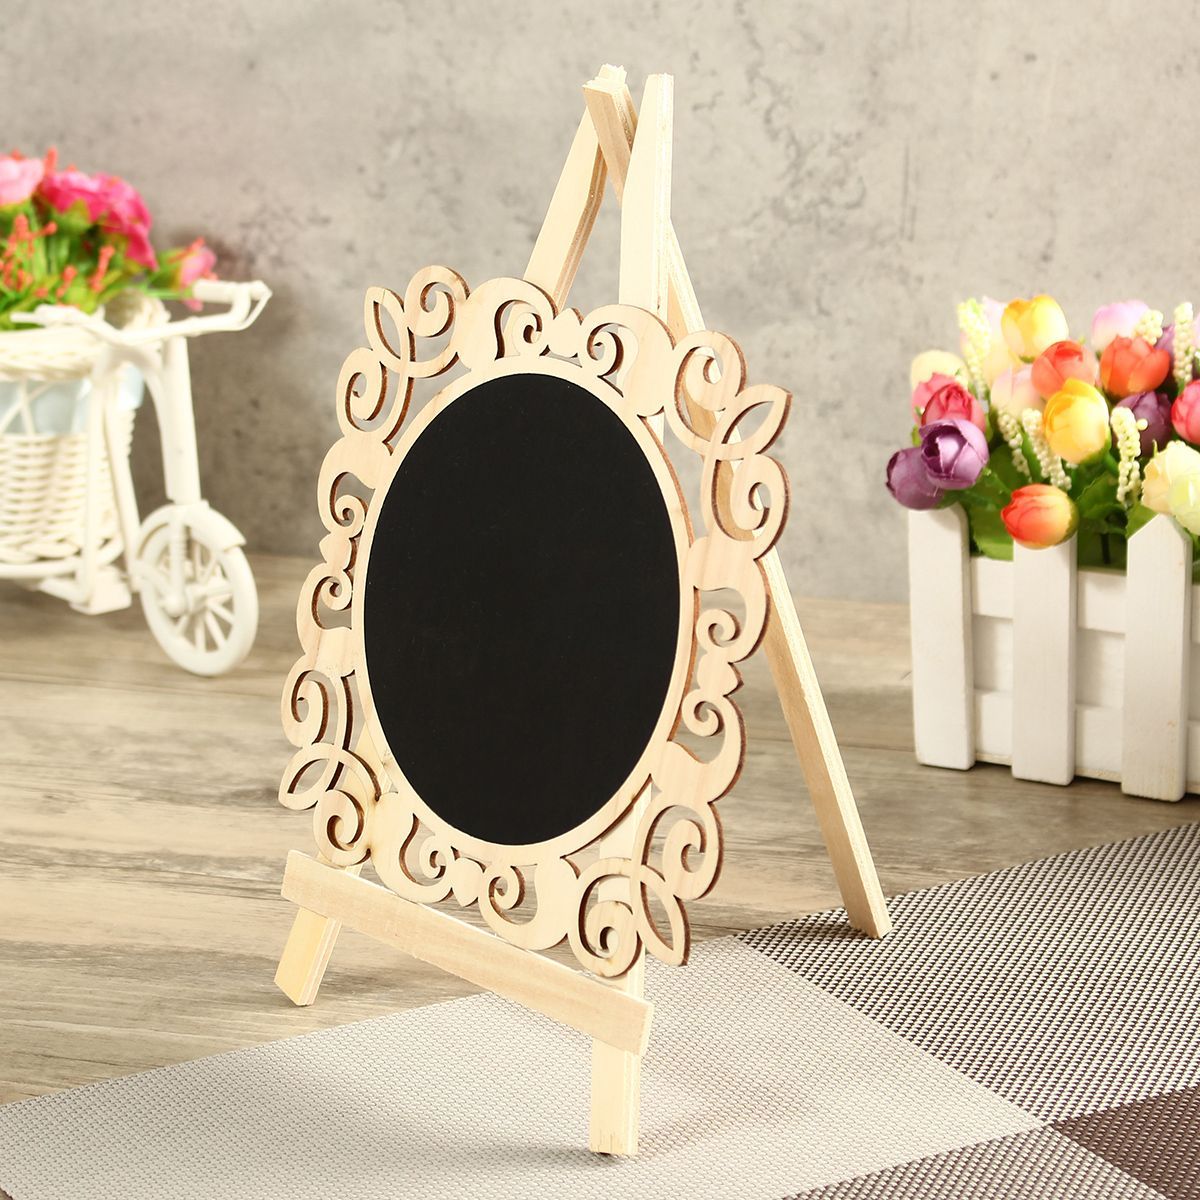 Mini-Vintage-Wooden-Blackboard-Table-Number-Signs-Message-Memo-Chalk-Board-Party-Decorations-1392943